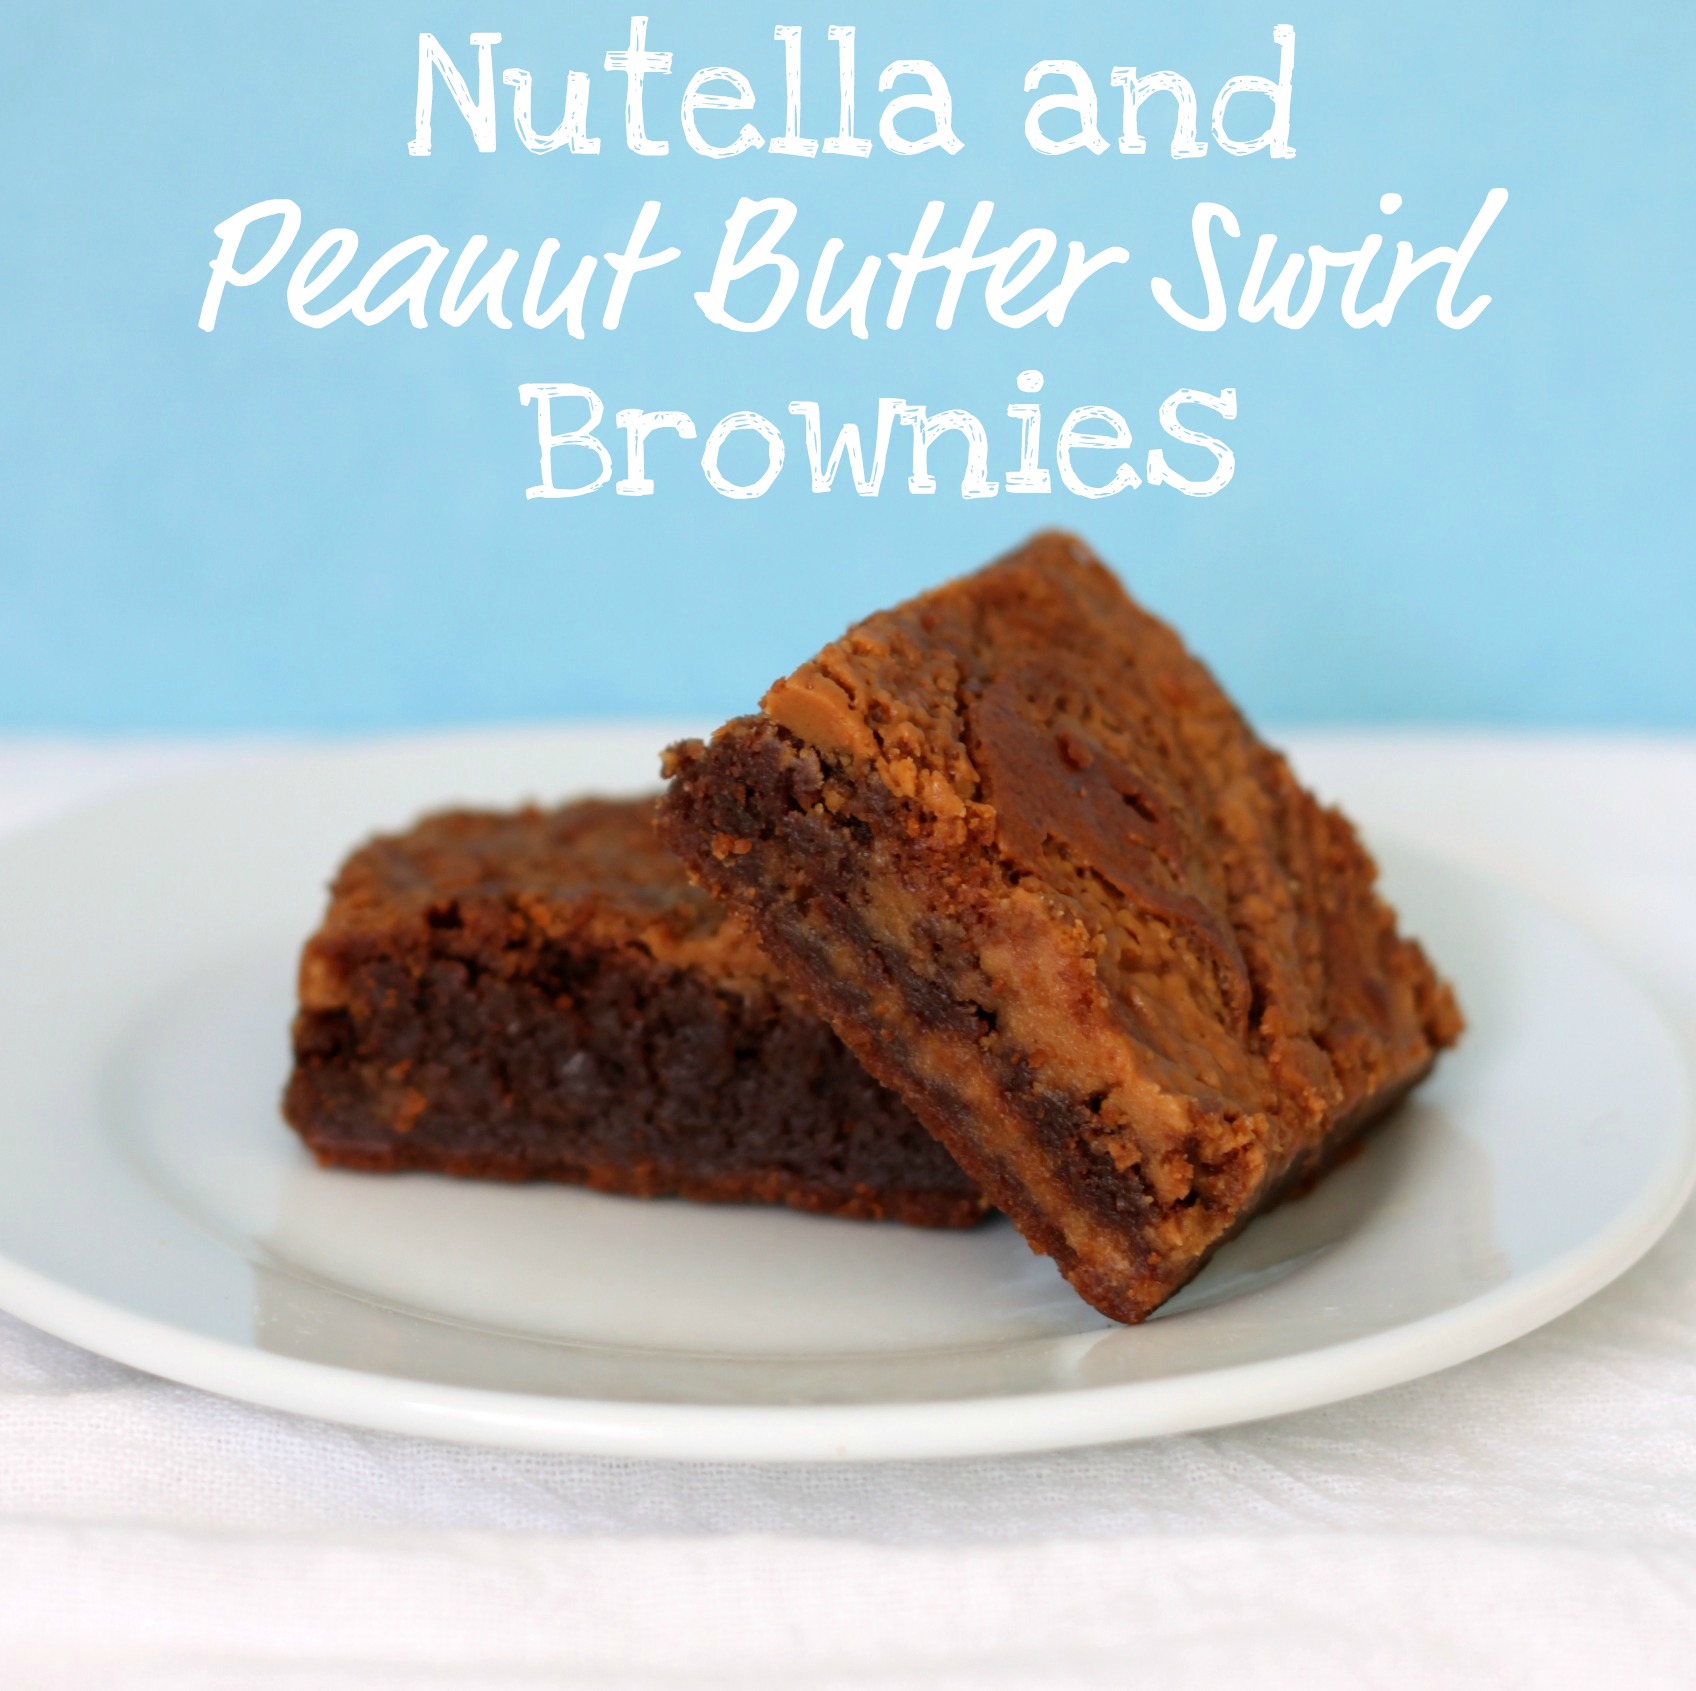 Nutella peanut butter brownies with text